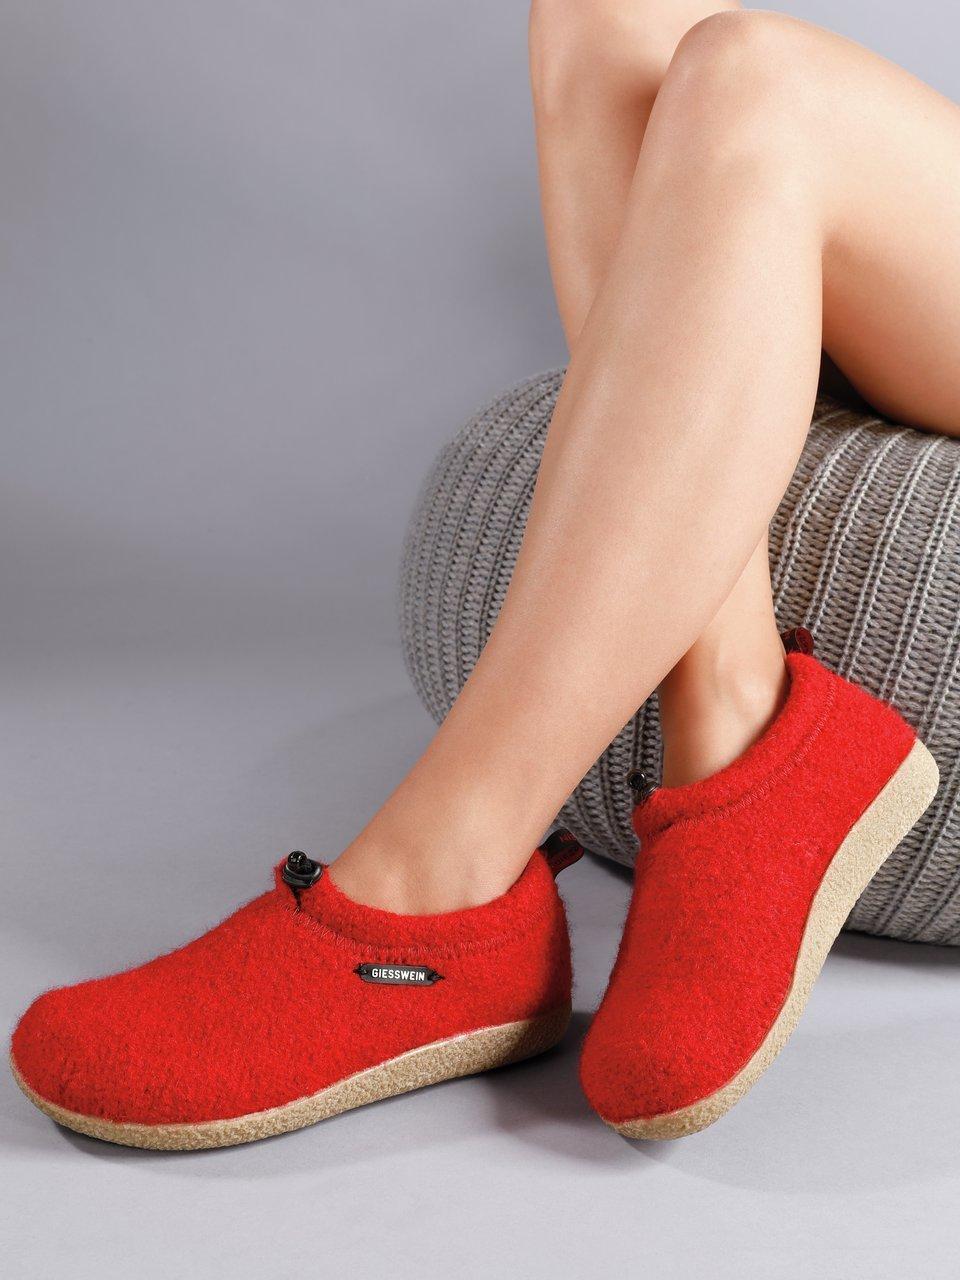 elleve Måske montage Giesswein slippers and fashion in the finest milled wool